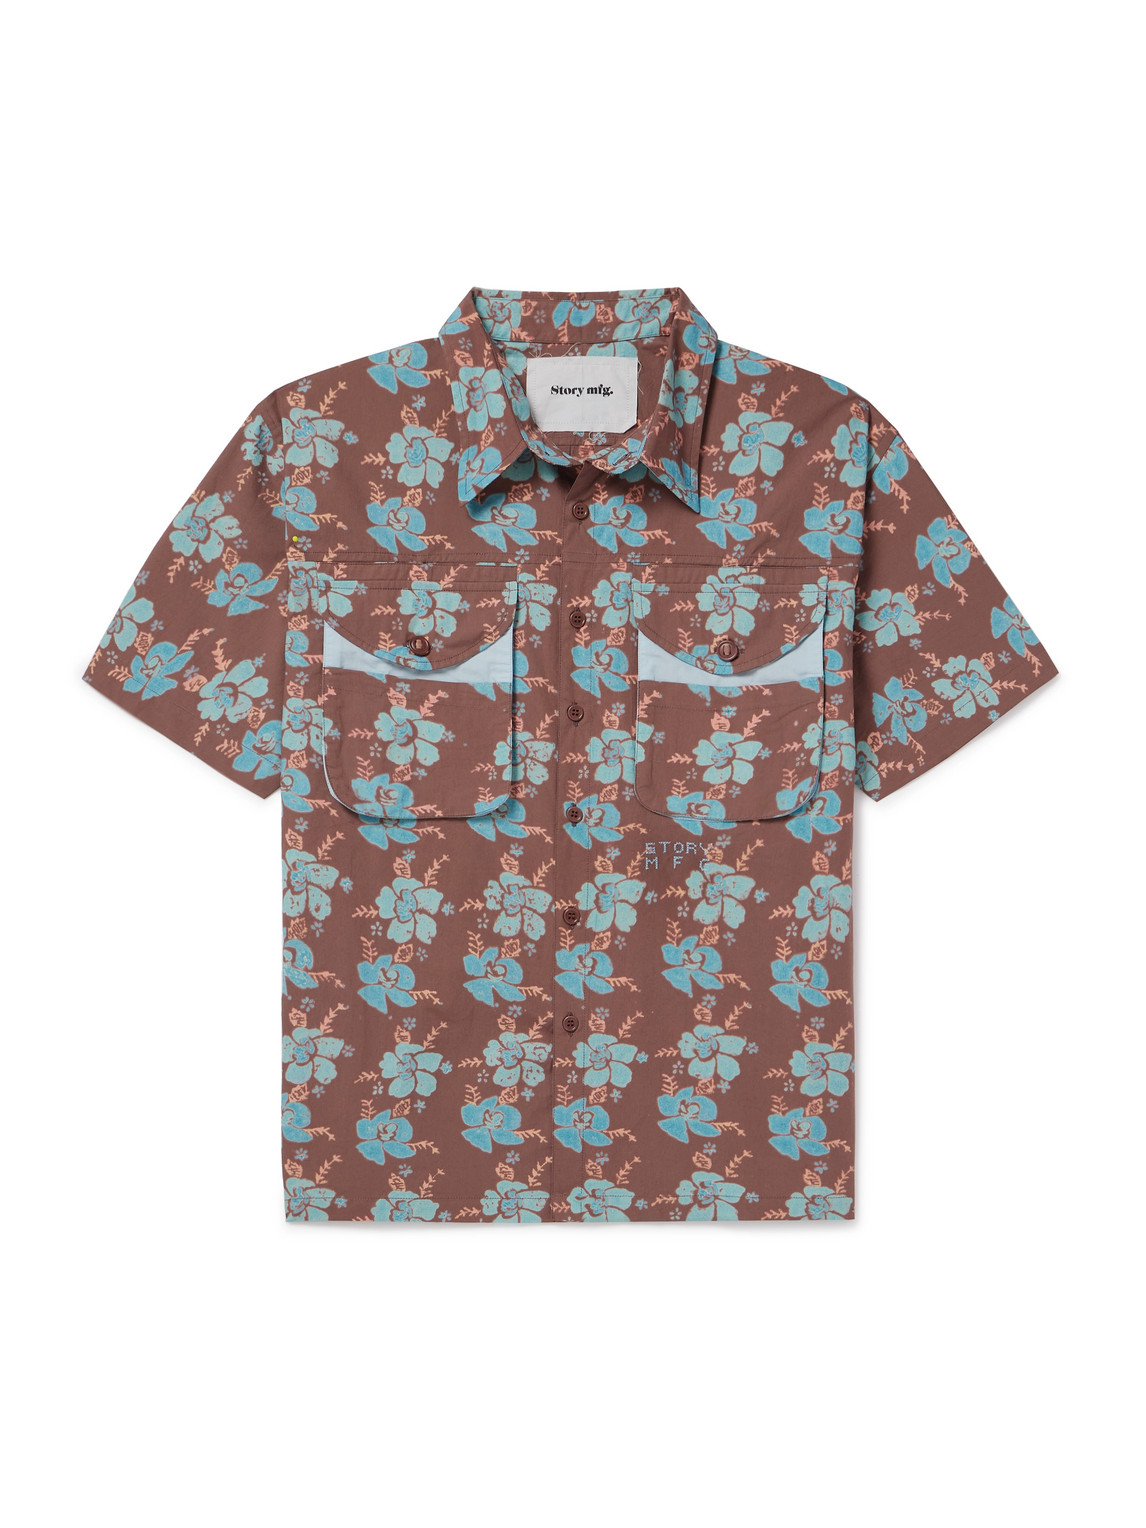 Story Mfg. Coch Floral-print Organic Cotton Shirt In Brown